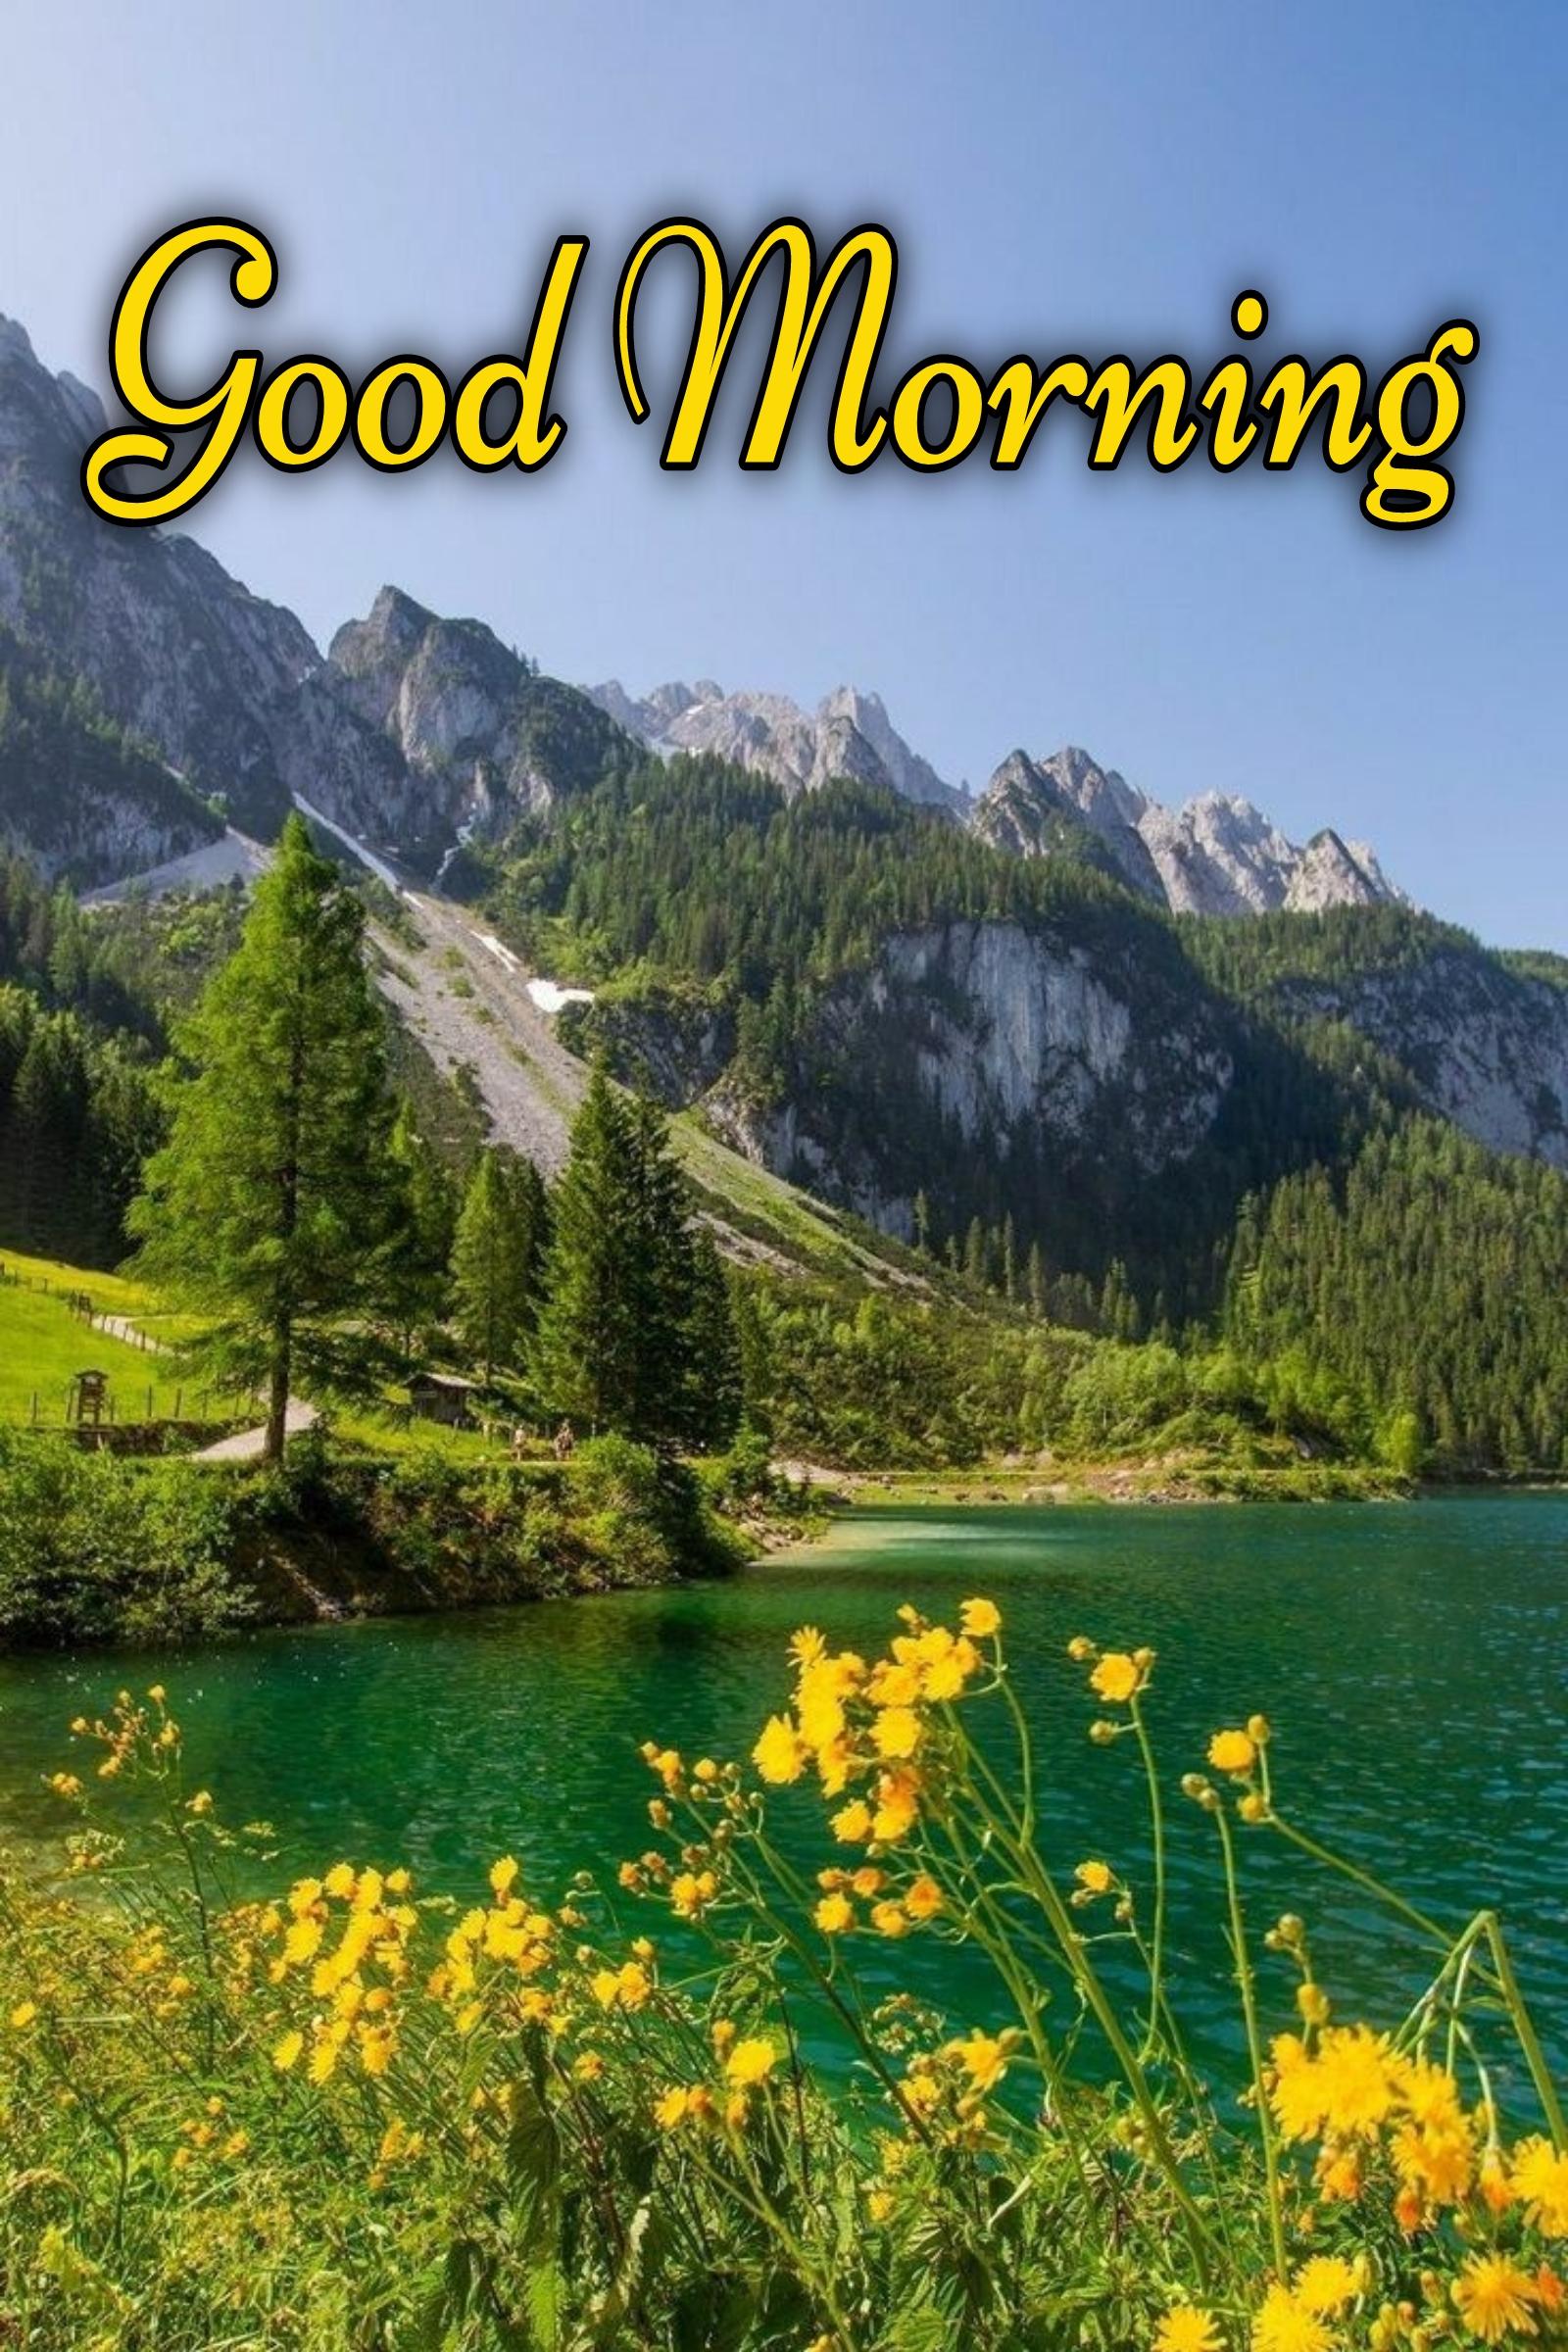 Good Morning Images Scenery